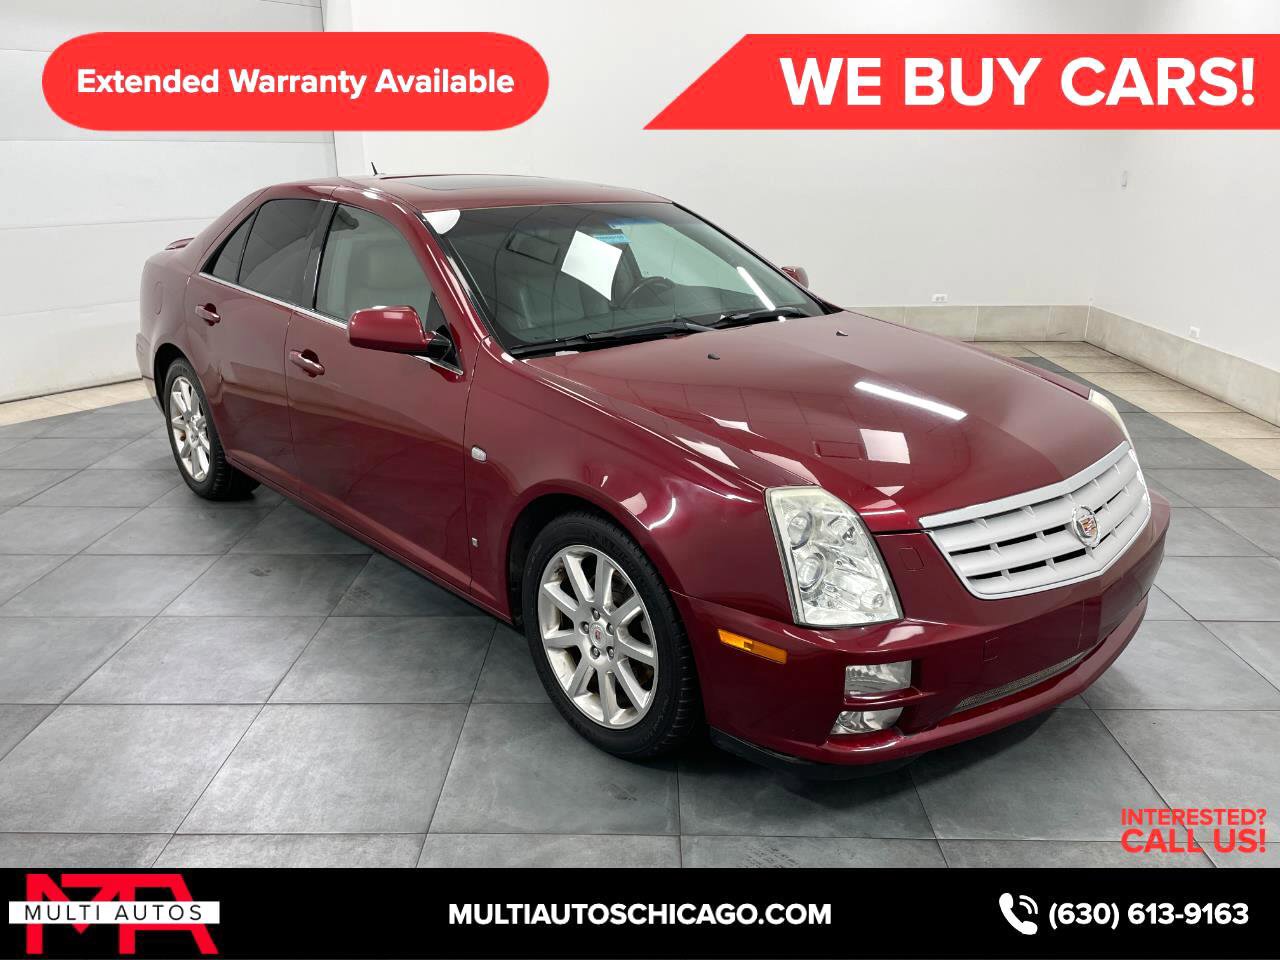 Used 2007 Cadillac STS for Sale in Hammond, IN (Test Drive at Home) -  Kelley Blue Book